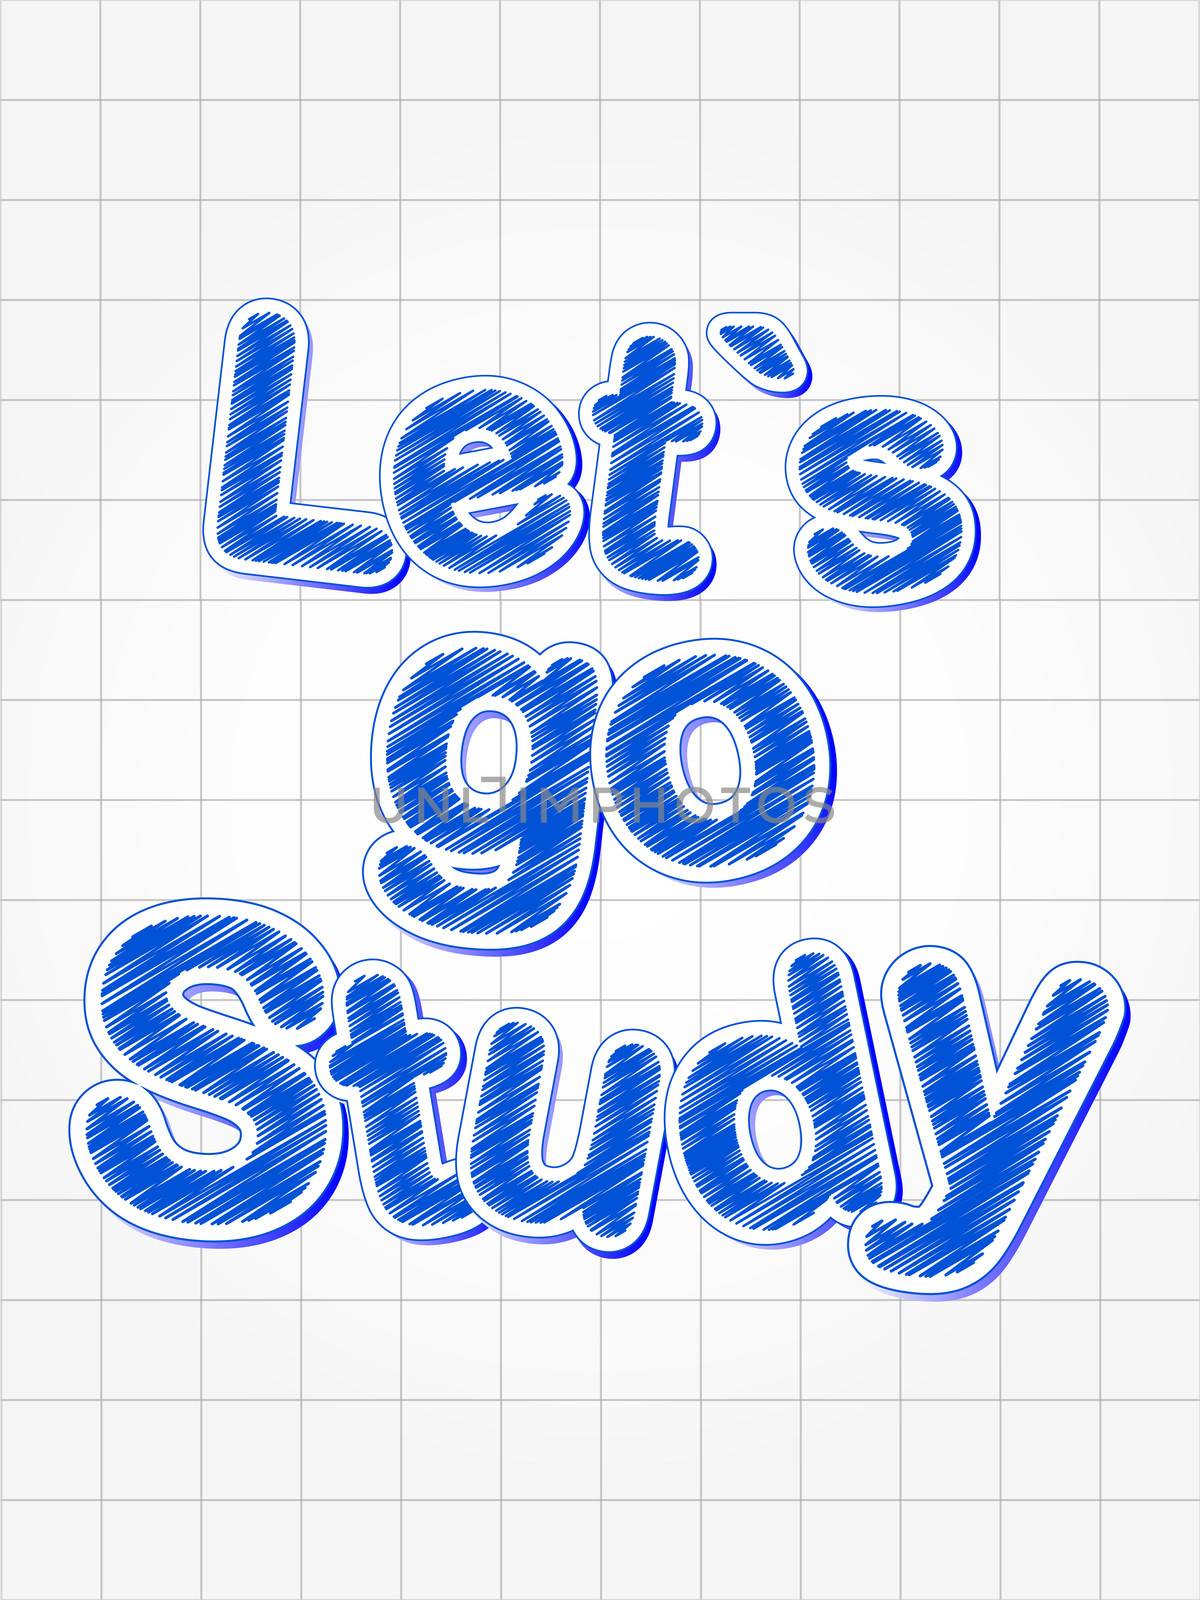 let's go study - blue letters over squared sheet of paper